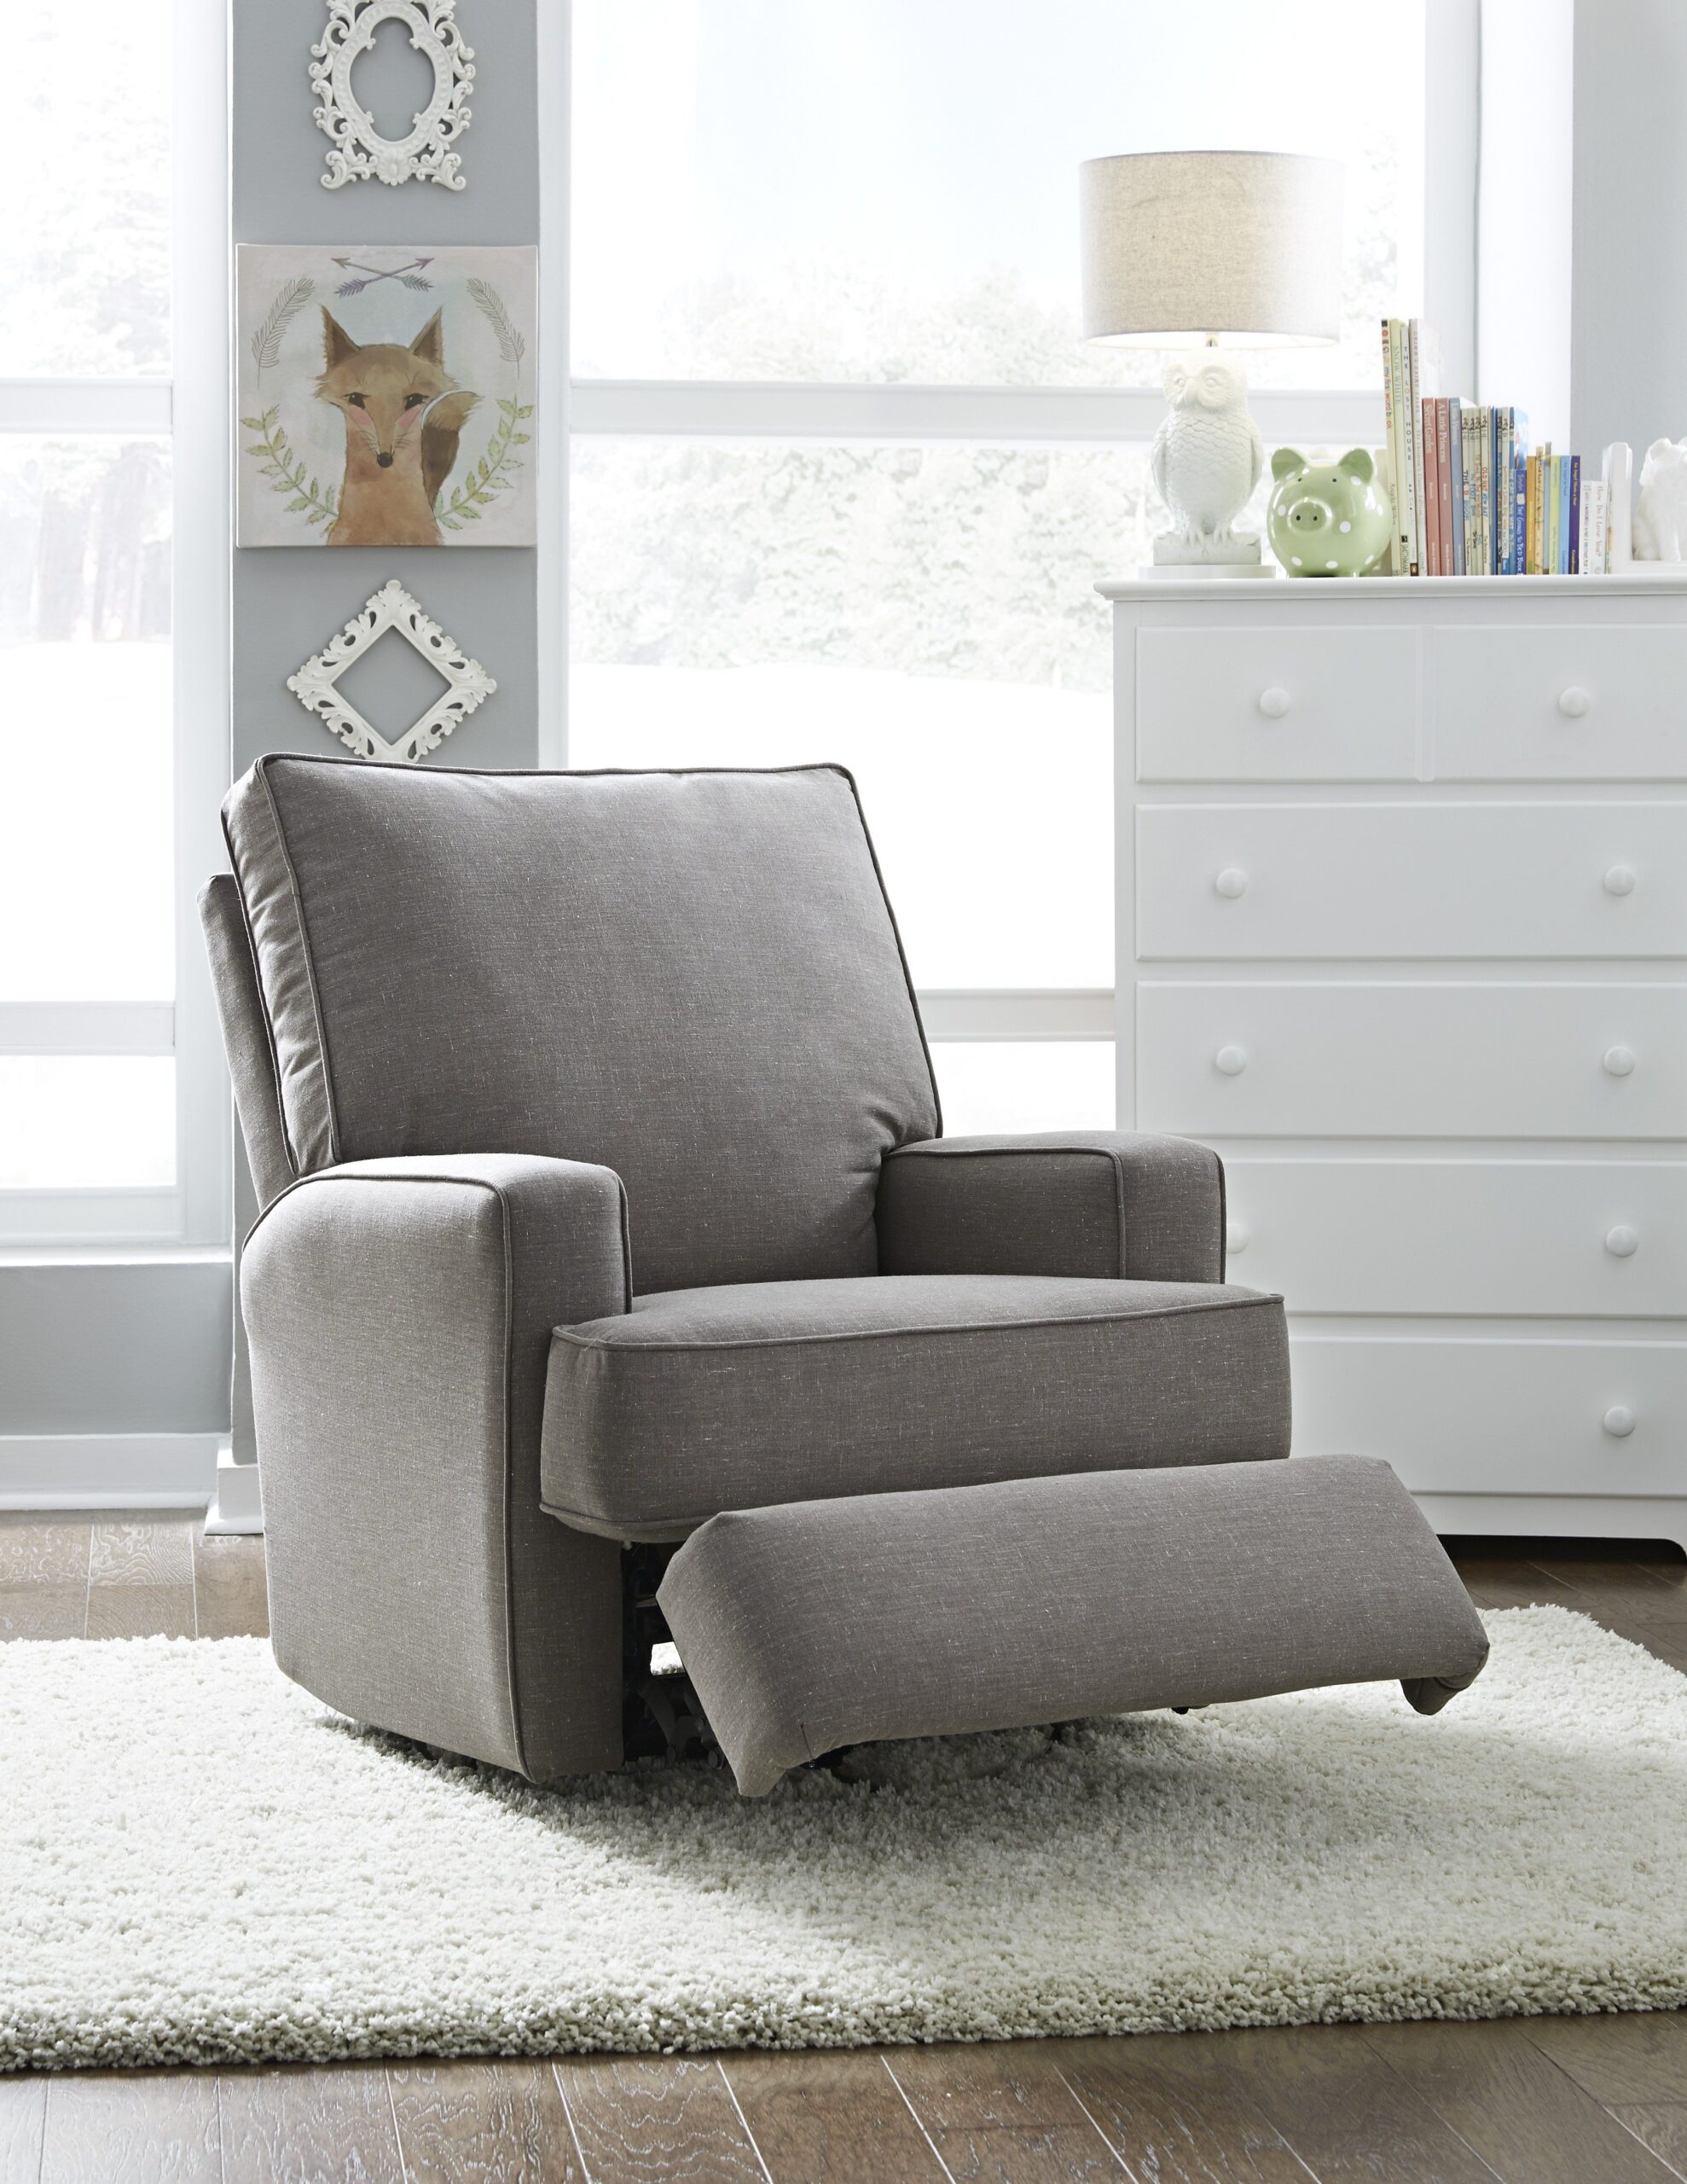 Top Glider Recliners for Maximum Comfort
and Style